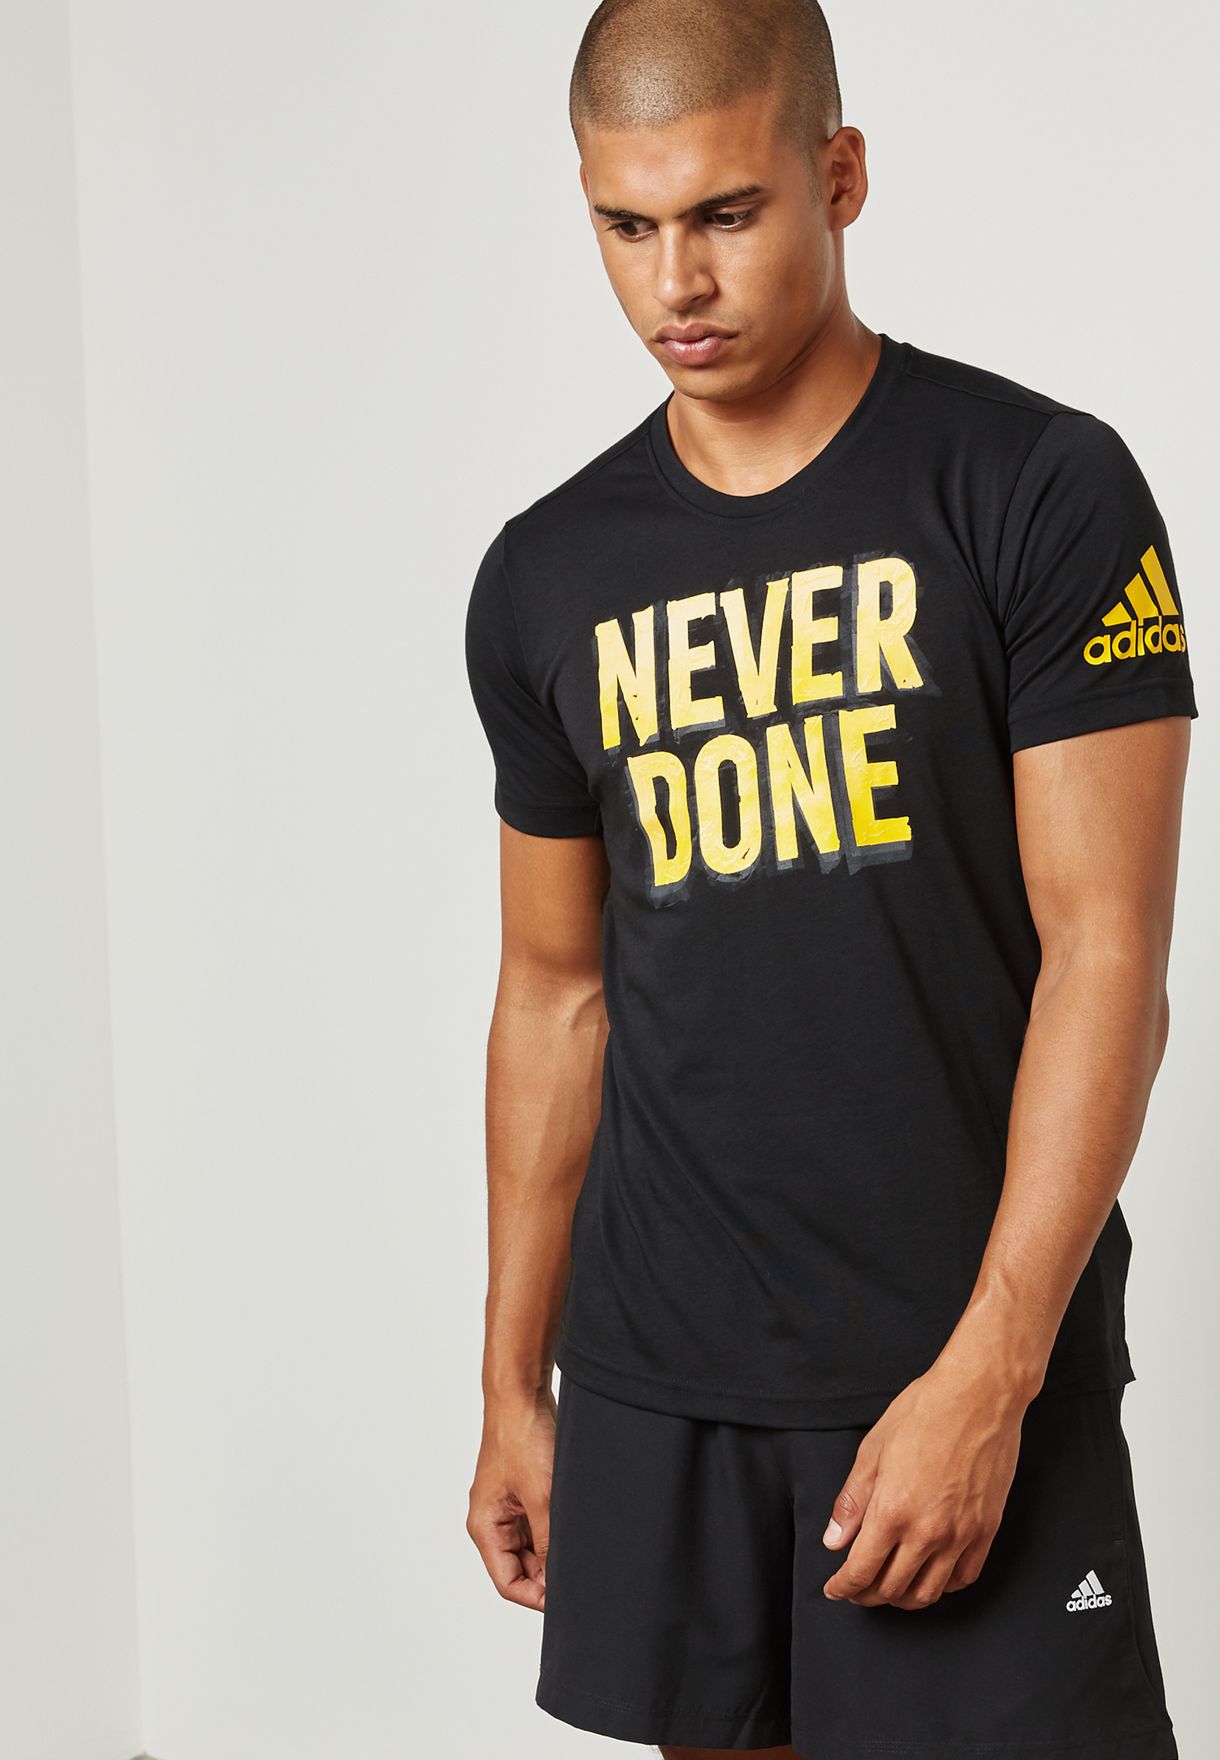 adidas never done t shirt